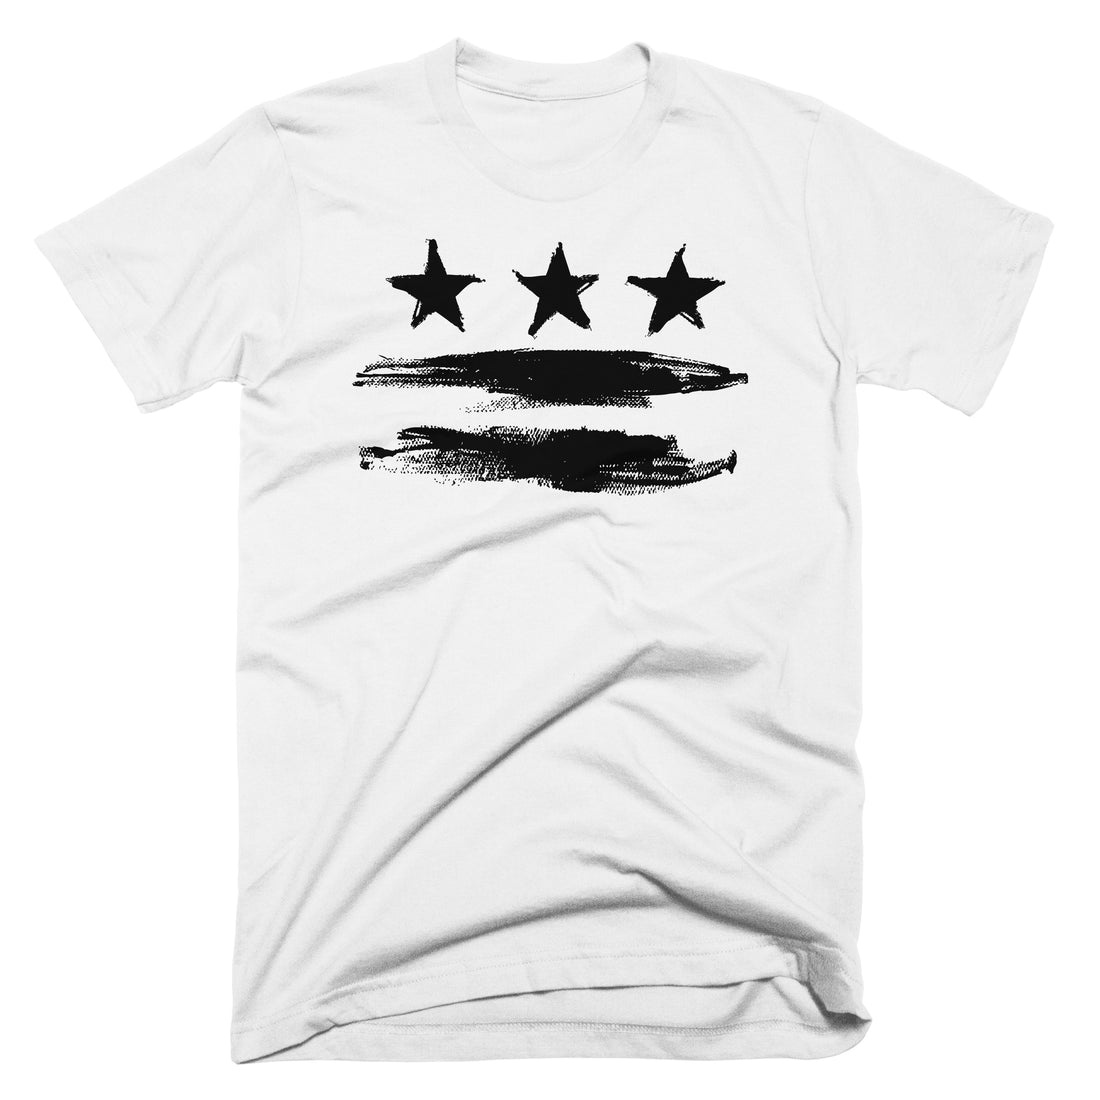 The Washington DC Flag Tee is back with a few new colors